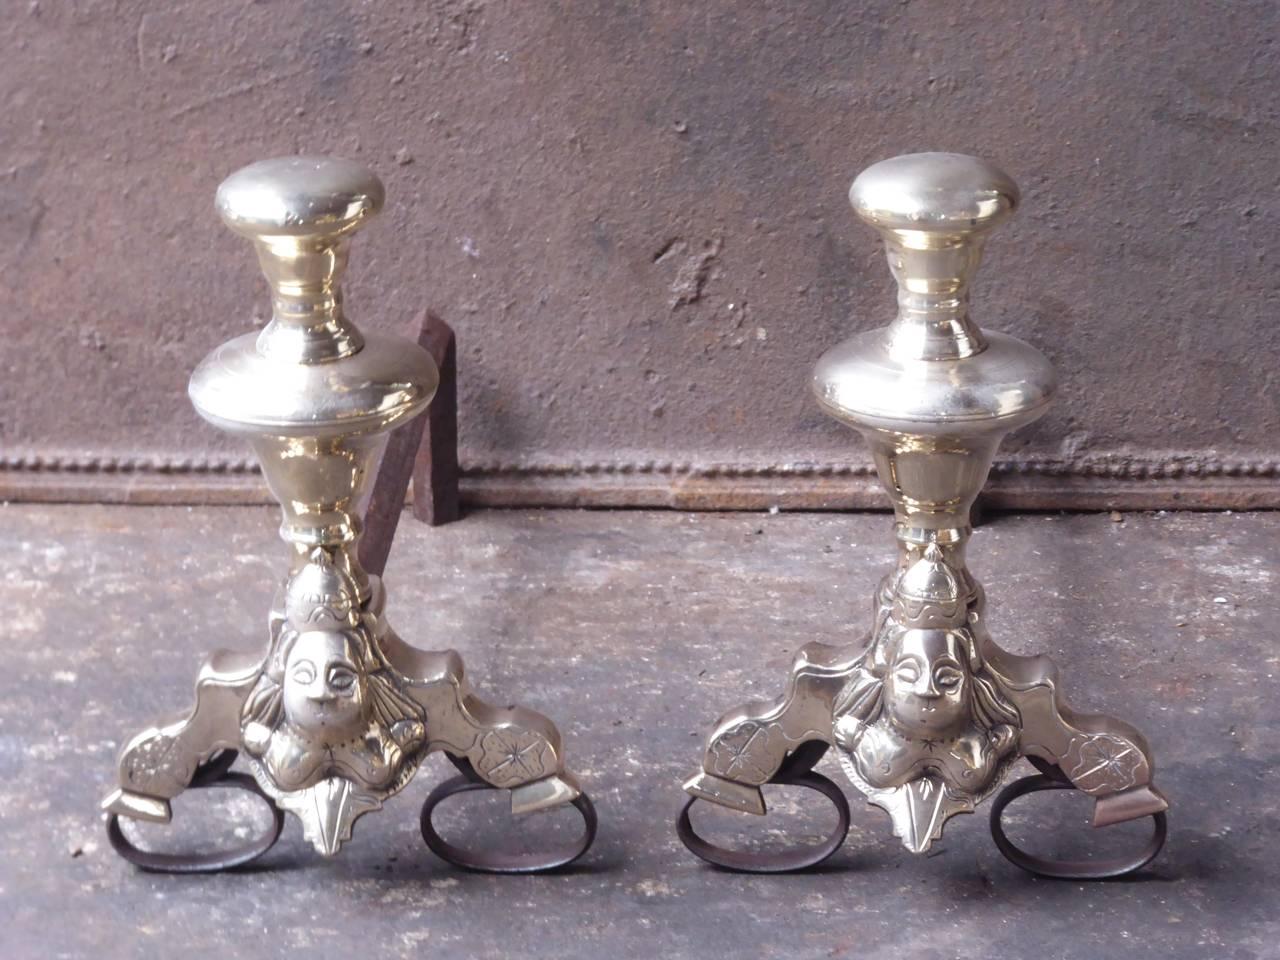 17th century French Louis XIV fire dogs made of polished brass and wrought iron.

We have a unique and specialized collection of antique and used fireplace accessories consisting of more than 1000 listings at 1stdibs. Amongst others, we always have